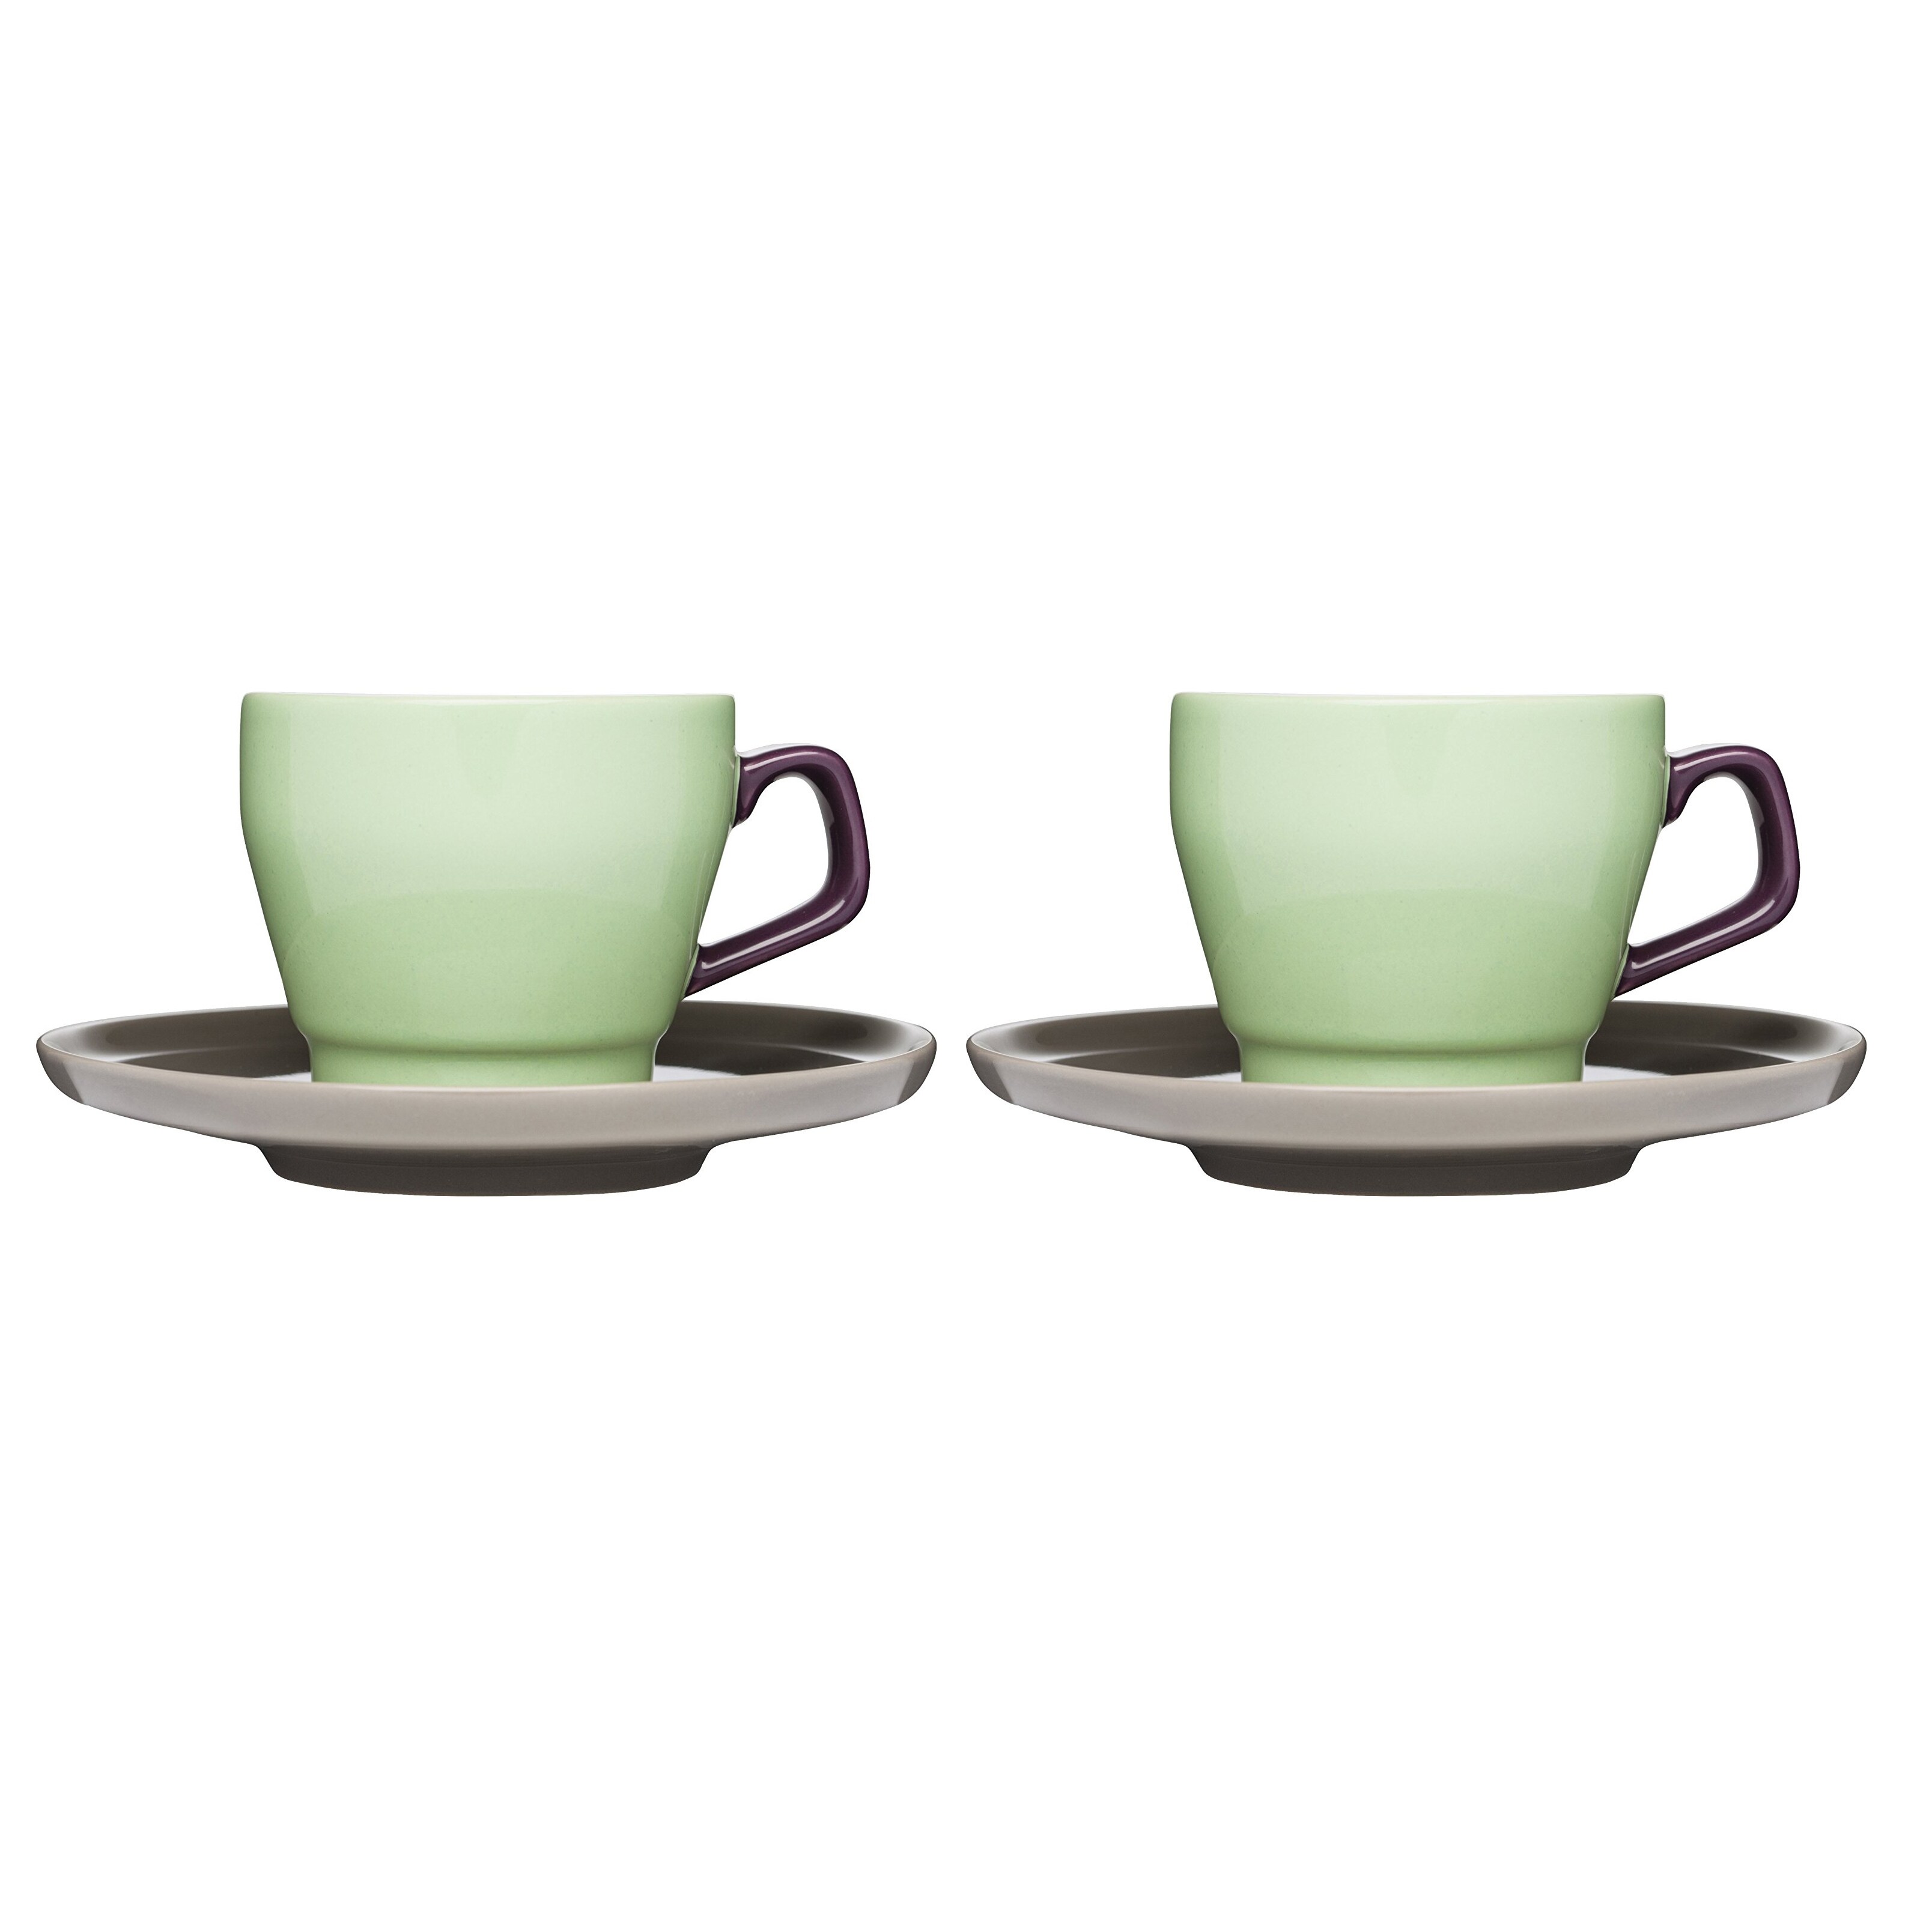 https://ak1.ostkcdn.com/images/products/is/images/direct/0d954dfd46bfa00c78ace532f11f8e2a30836cab/Sagaform-POP-Stoneware-Coffee-Cup-and-Saucer%2C-Green-Purple-Brown%2C-Set-of-2.jpg